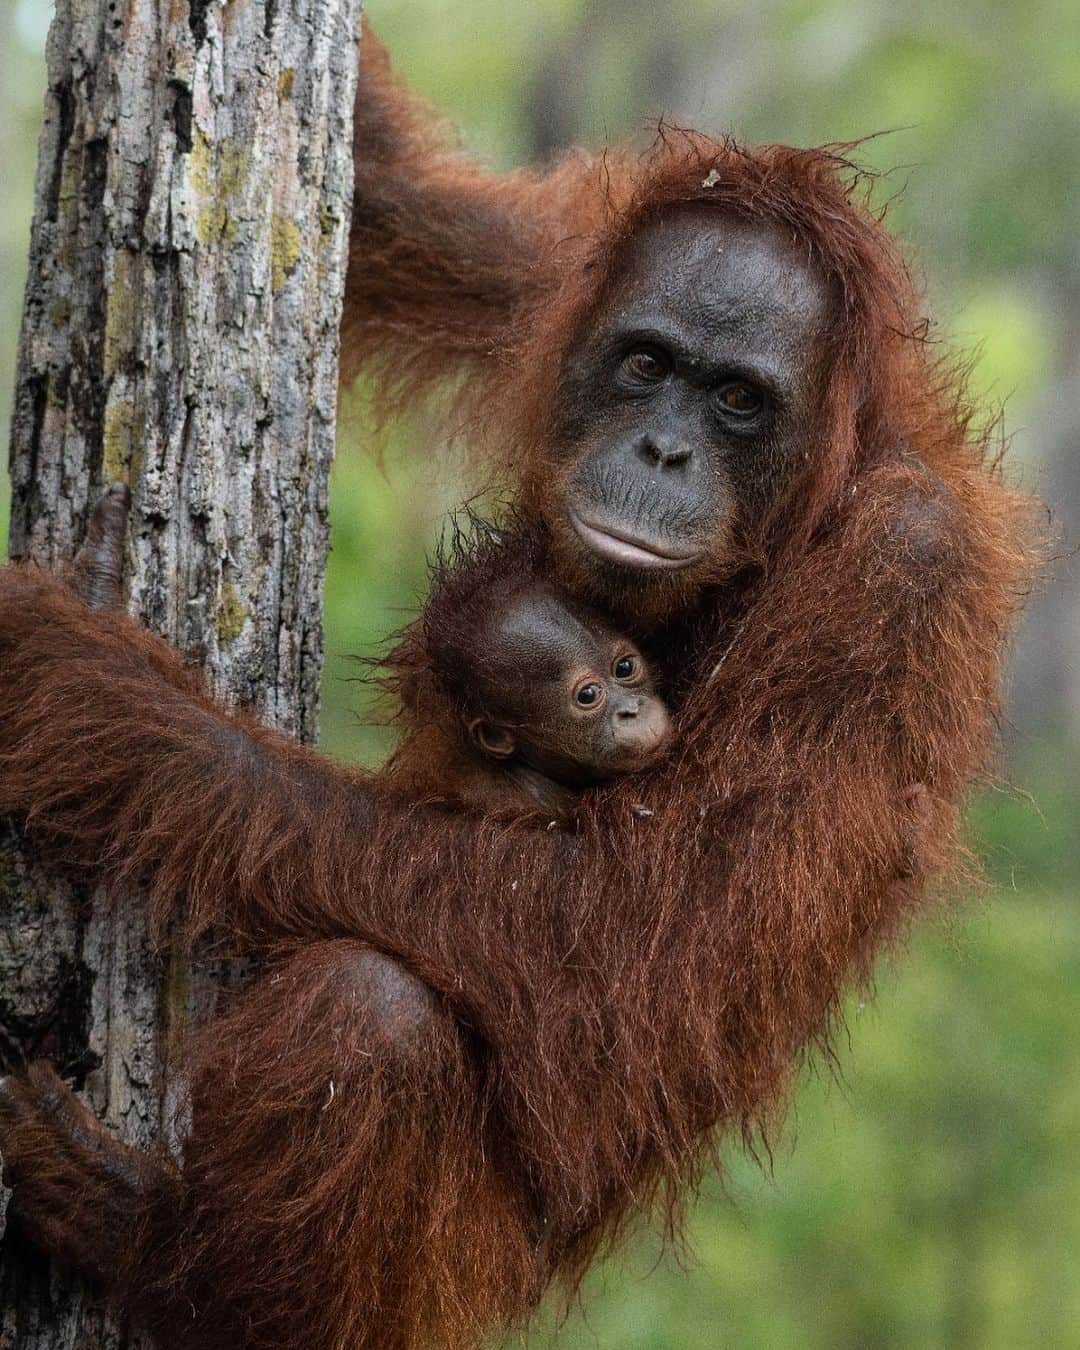 OFI Australiaのインスタグラム：「Orangutan infants cling tightly to their mothers and don't let go until almost one year old! Emmett, who is only 3 months old, holds onto his mother Enon high in the trees at one of OFI’s release sites. Enon was successfully released back into her rainforest home and now has a new baby to care for. Emmett is her third baby! We love sharing these success stories as they provide hope for saving these critically endangered animals 🧡🦧🧡  #SaveOrangutans #saynotopalmoil #orangutanconservation #OrangutanRehabilitation #ofiaustralia #ofi #orangutanfoundationinternational」